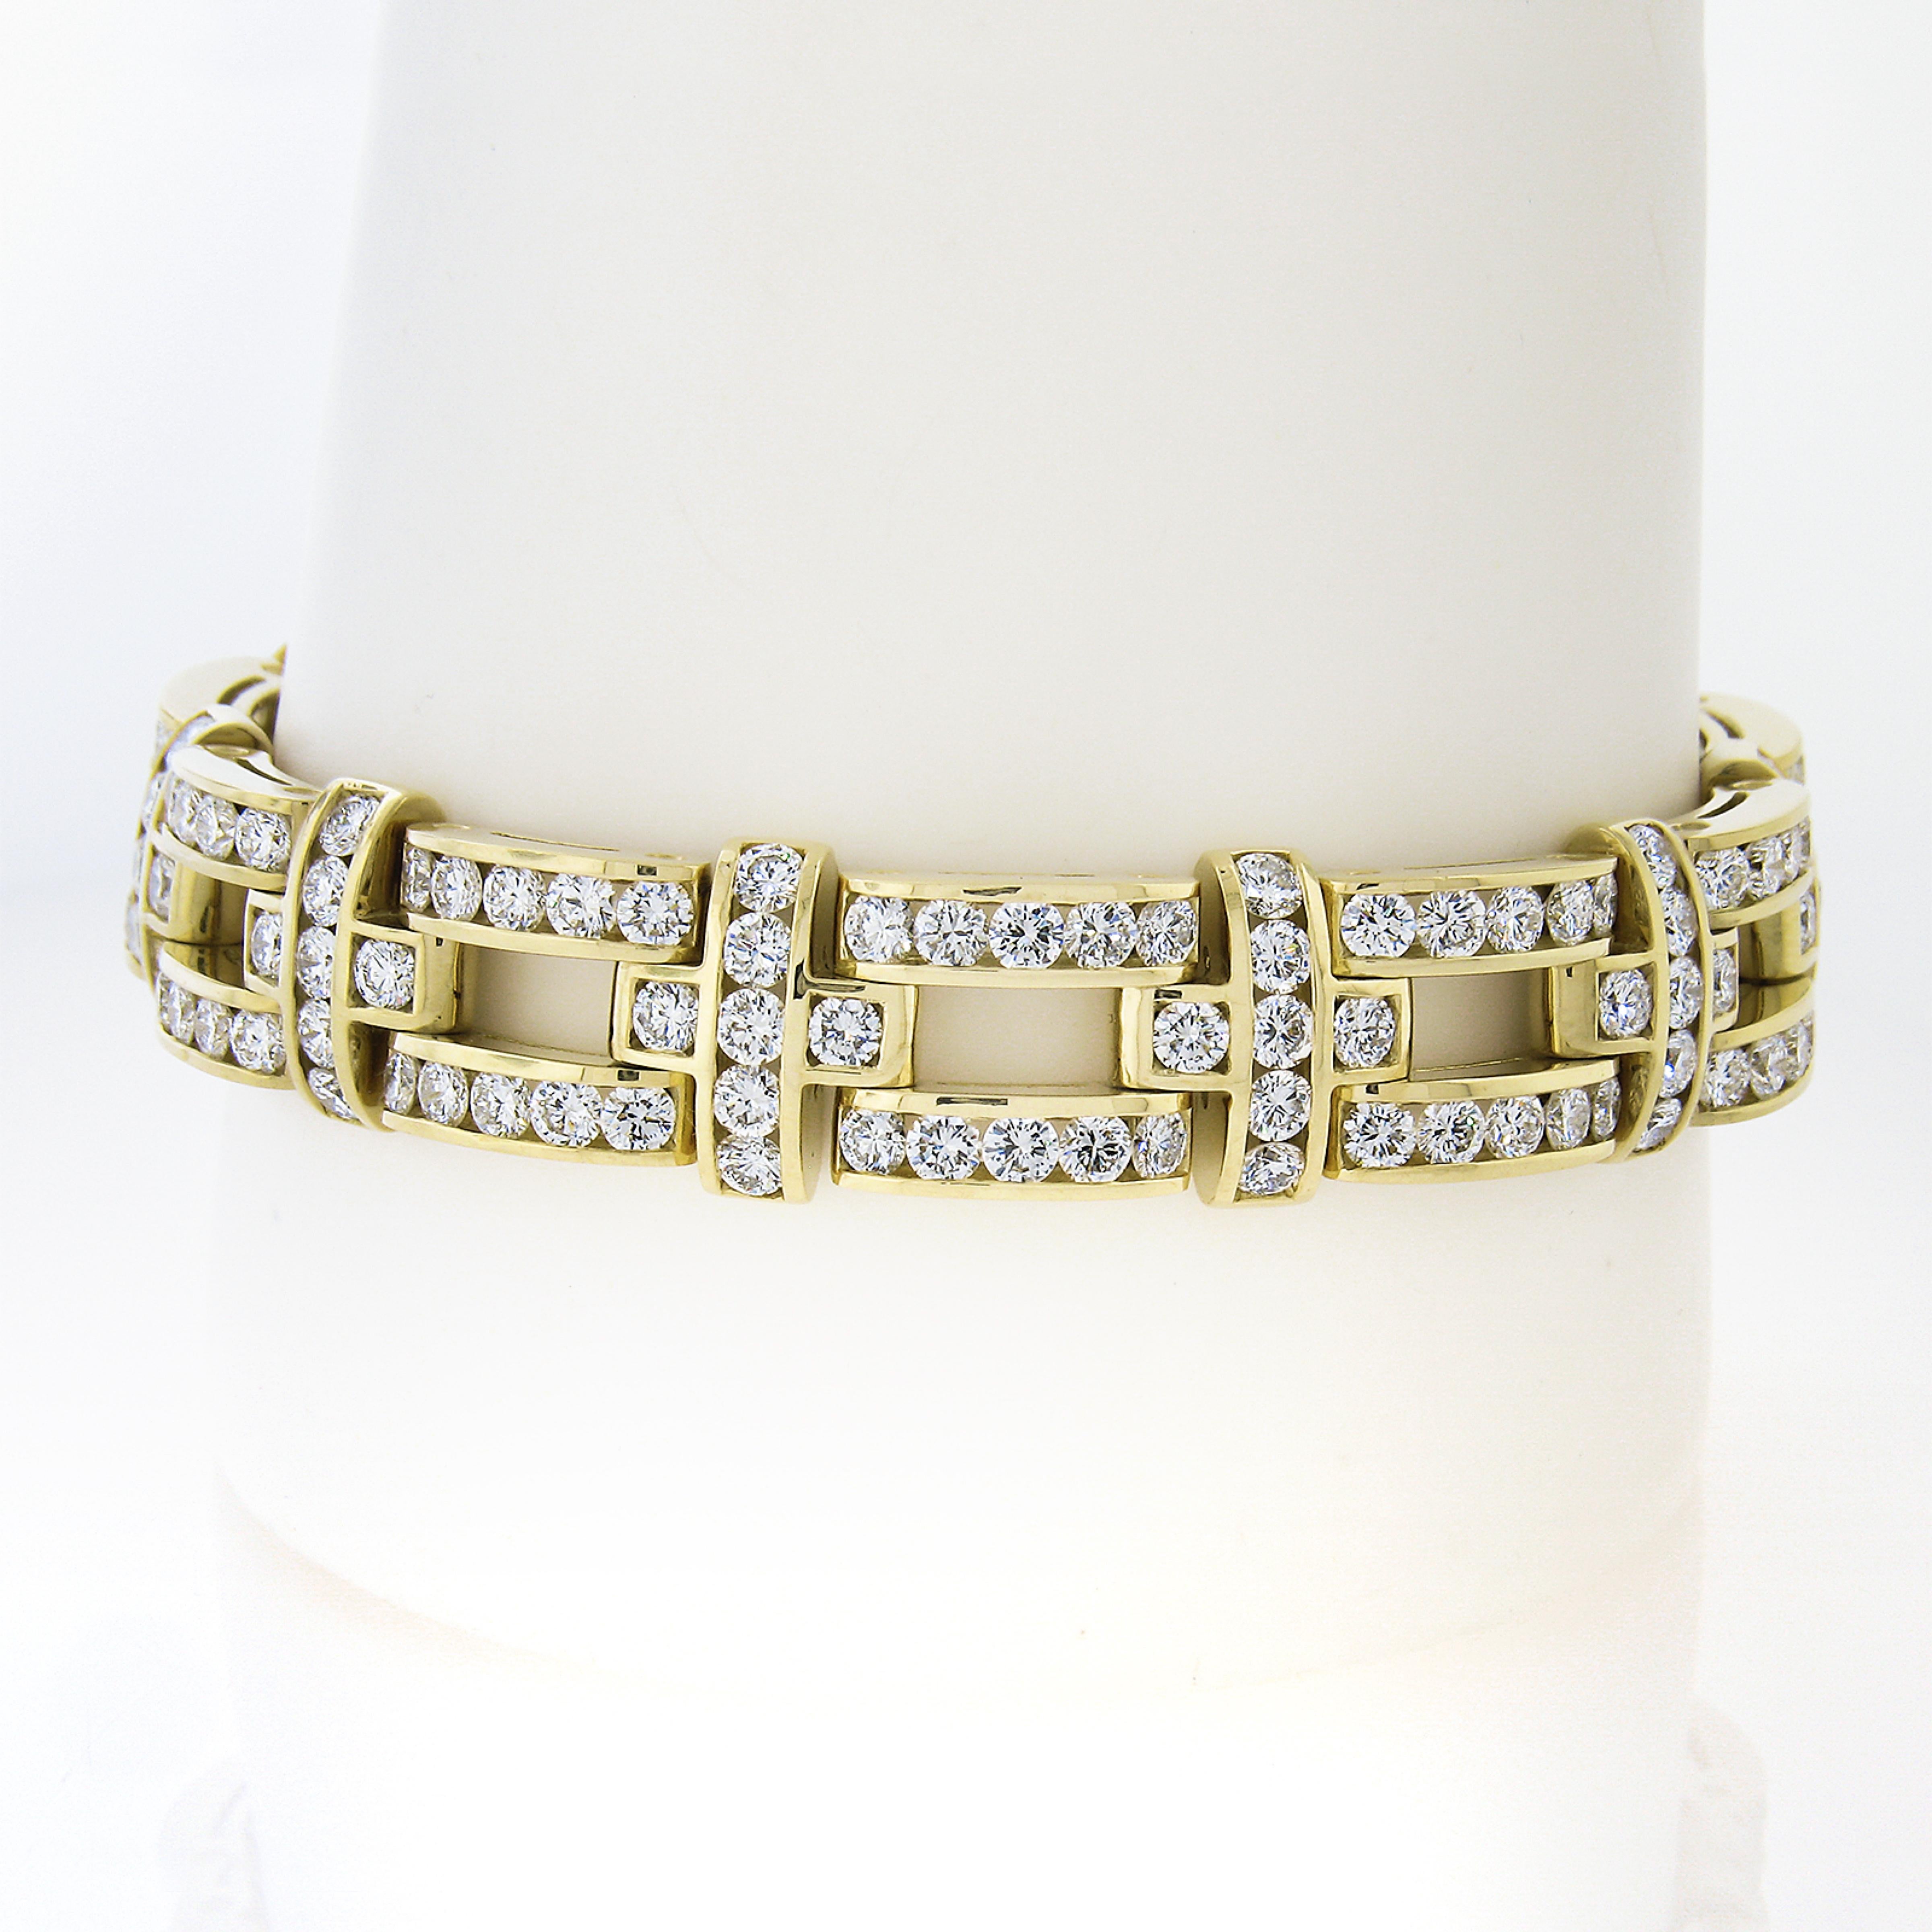 Here we have a truly jaw dropping diamond drenched link statement bracelet that is crafted from solid 18k yellow gold. This very well made bracelet is structured from wide open links that are perfectly channel set with approximately 14.9 carats of